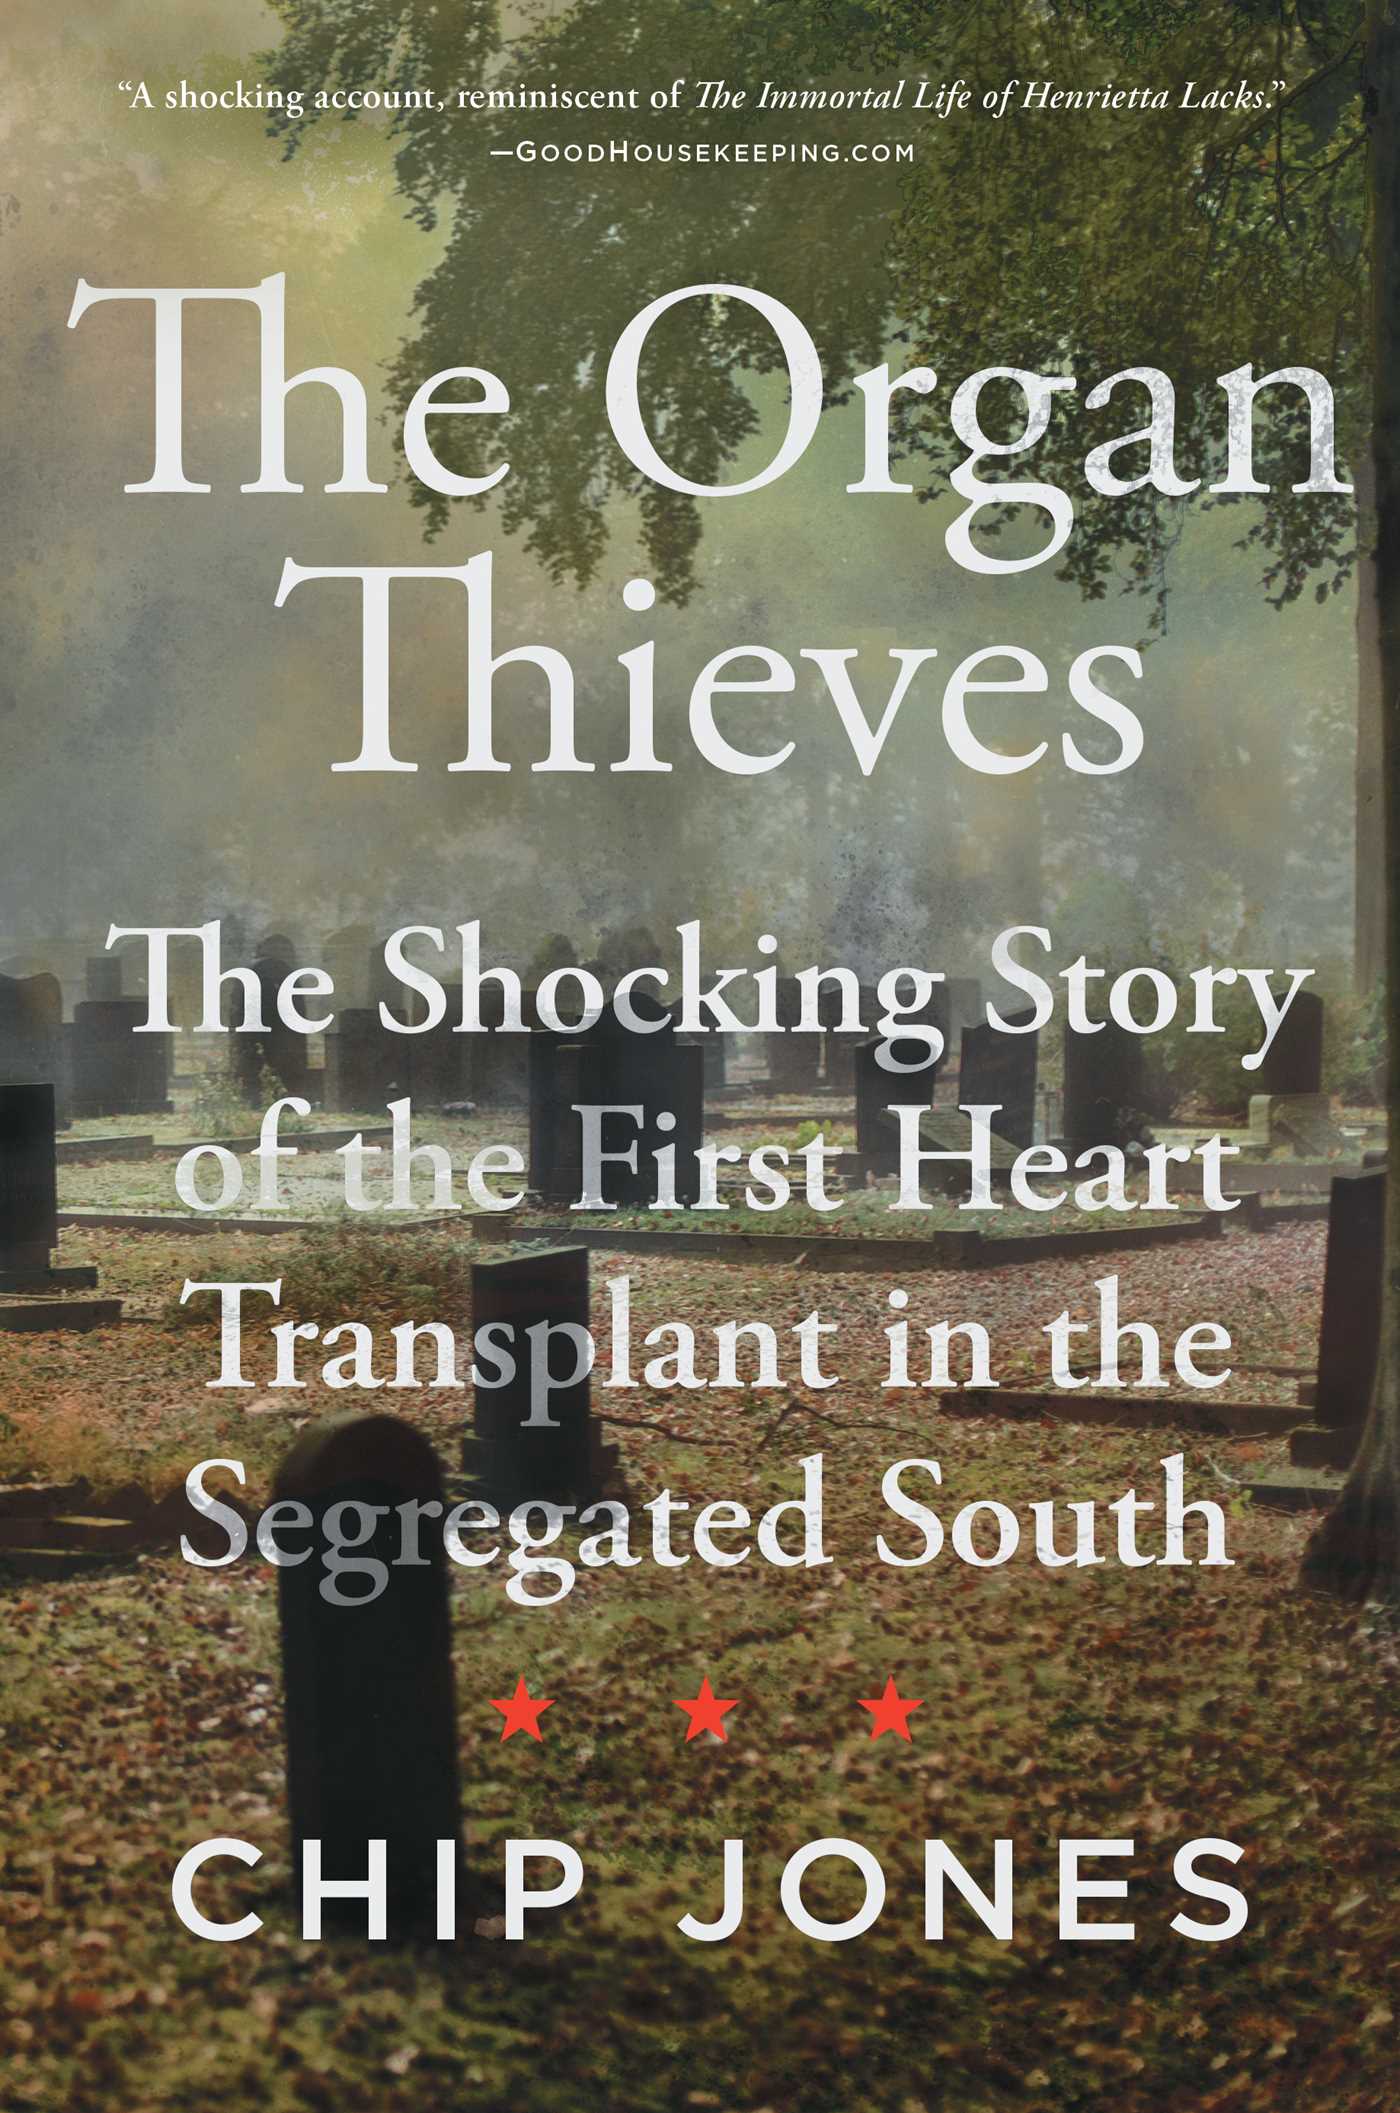 Organ Thieves book cover: A foggy cemetart with tombstones